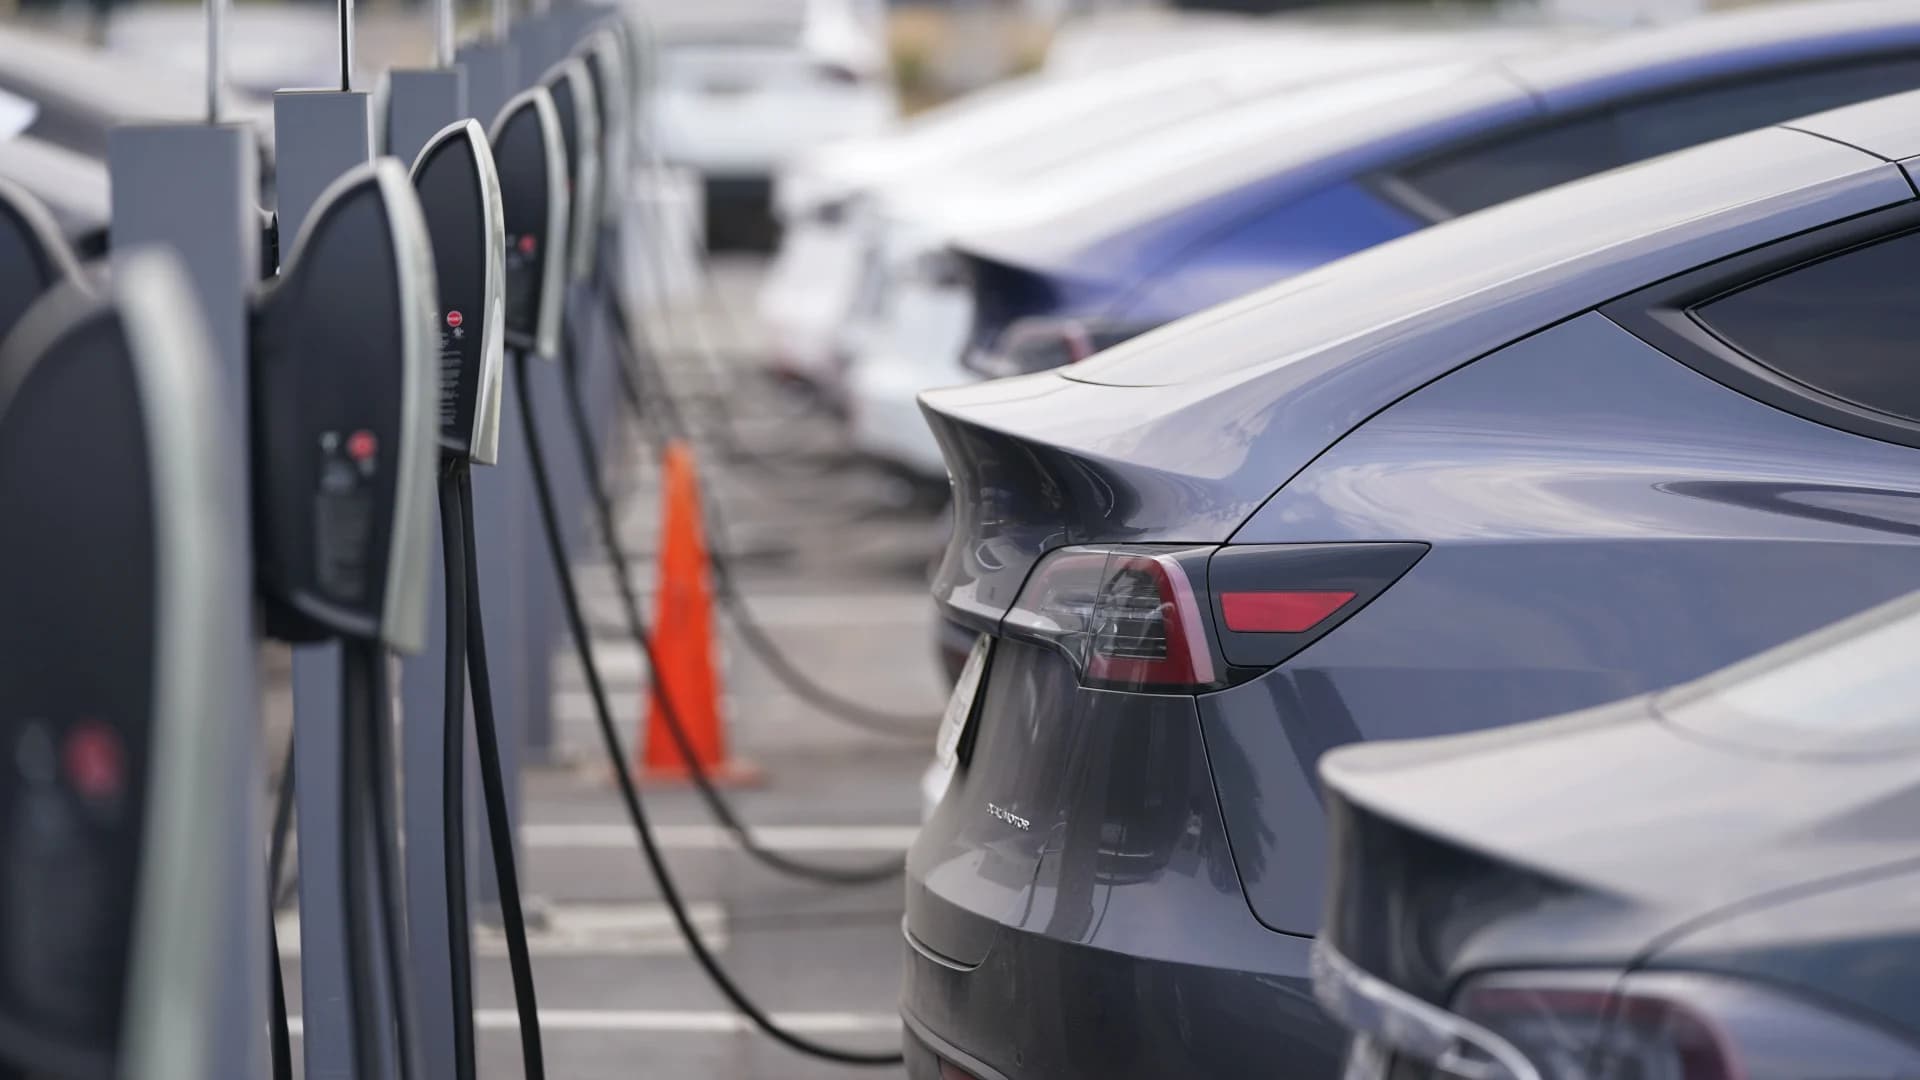 New bill requires all passenger vehicles sold in New York to be electric by 2035